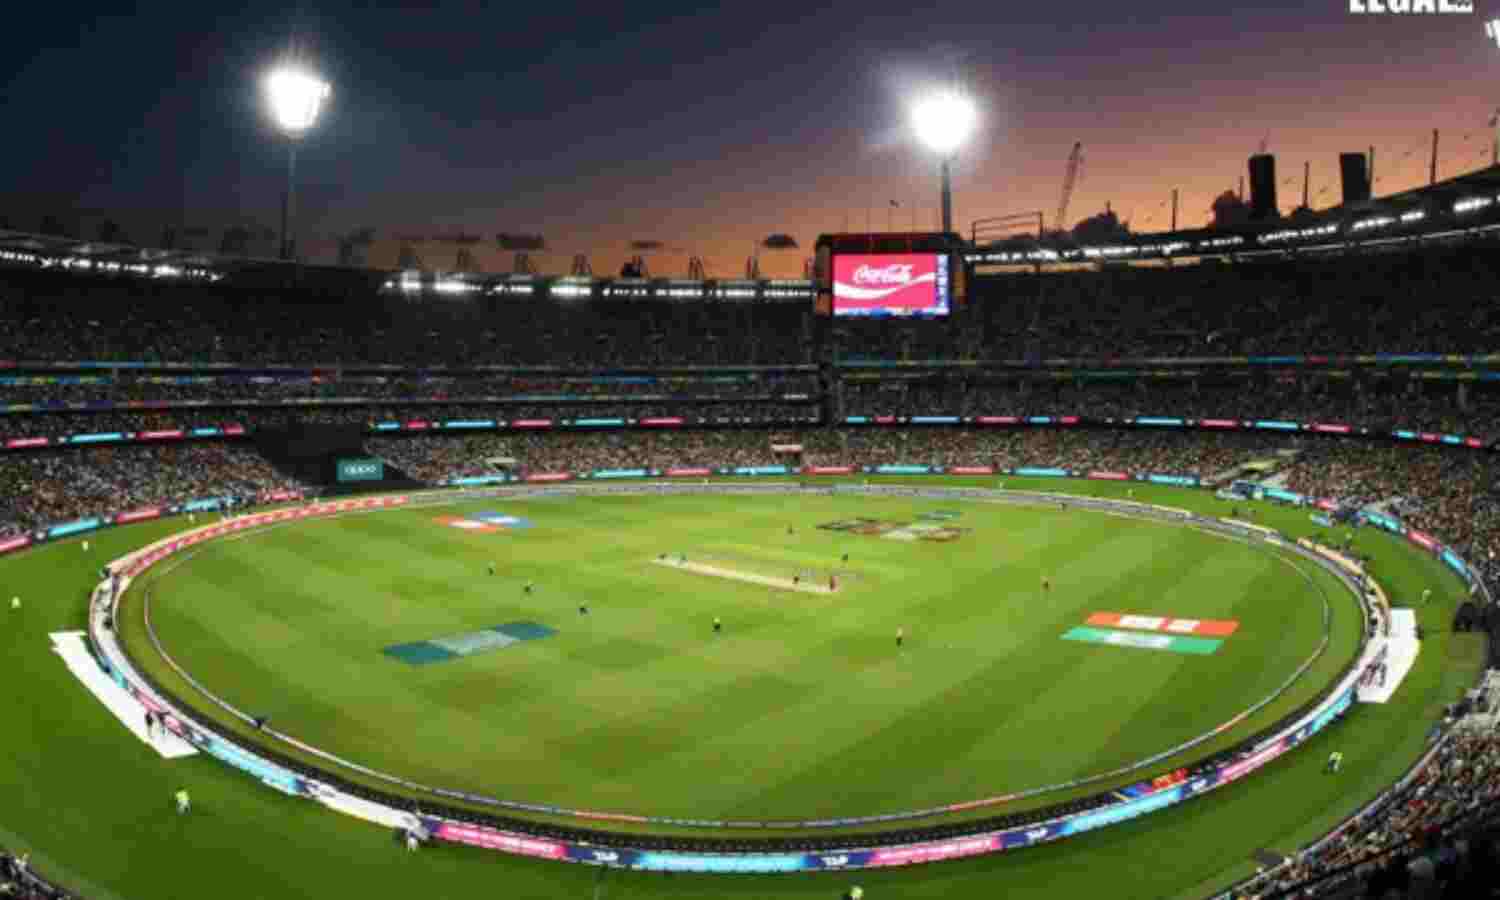 Delhi High Court Restrains Rogue Websites from Streaming Indias Cricket Matches on Plea by Viacom18